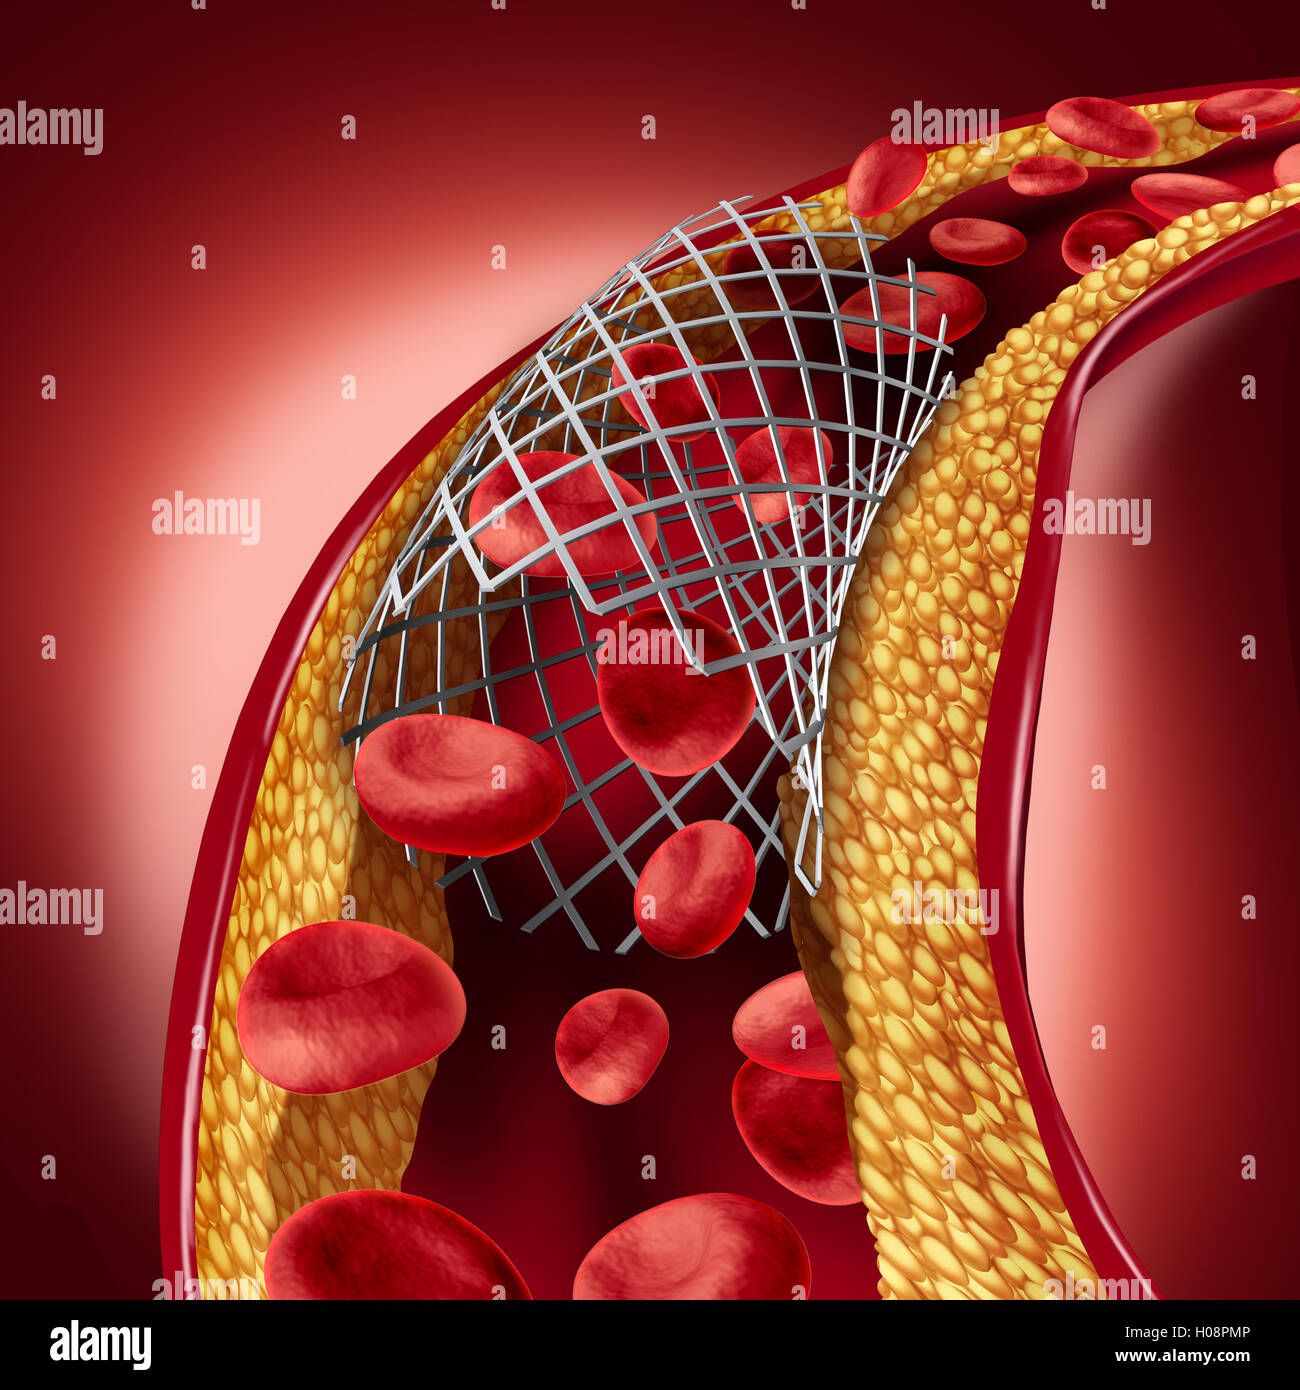 Stent implant concept as a heart disease treatment symbol with an angioplasty procedure in an artery that has cholesterol plaque blockage being opened for increased blood flow as a 3D illustration. Stock Photo